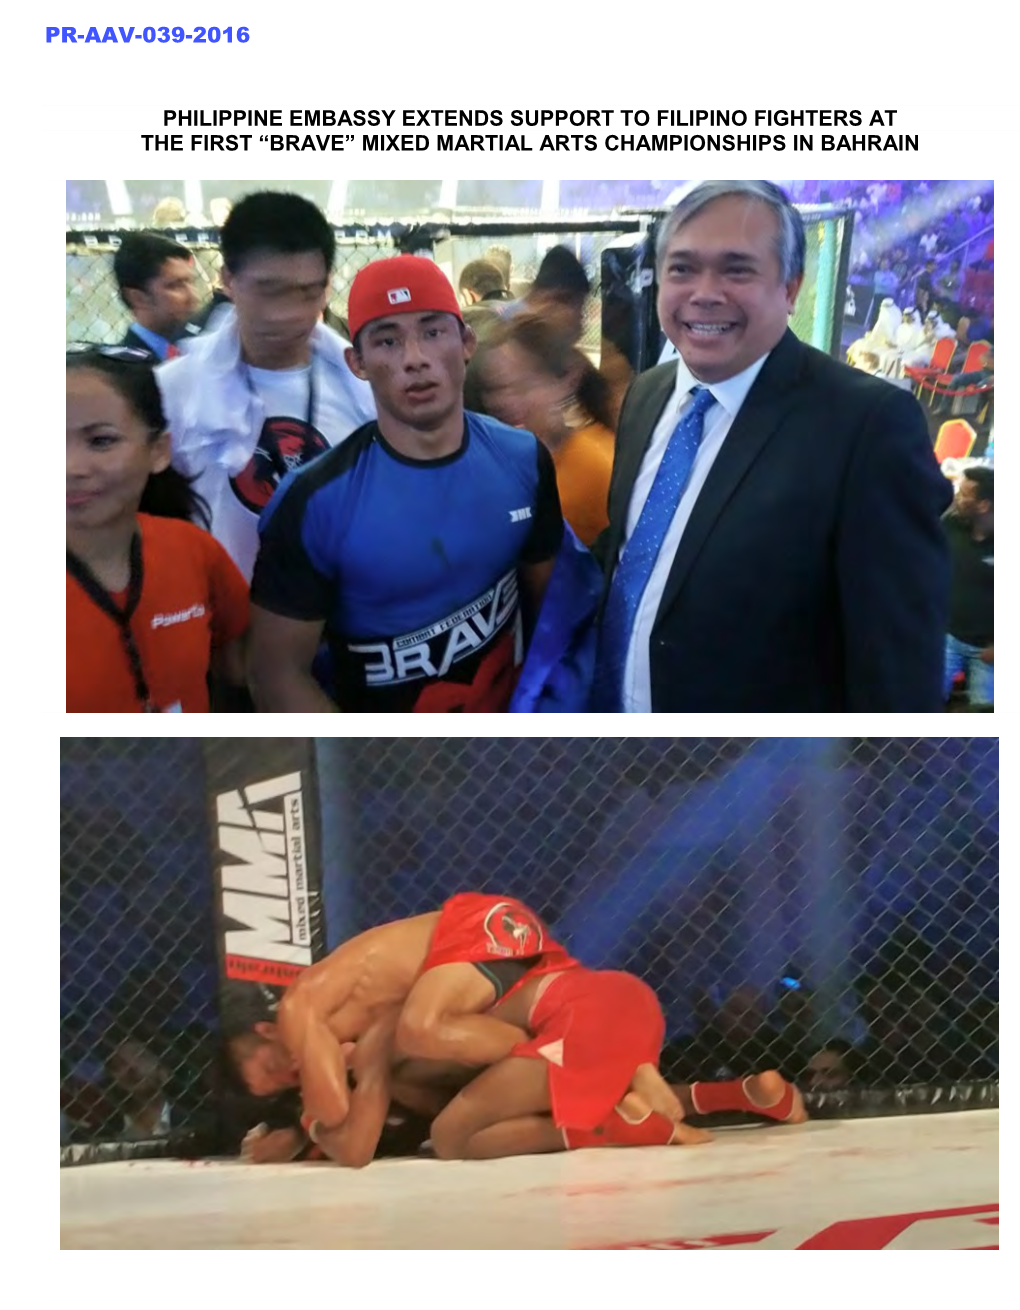 Philippine Embassy Extends Support to Filipino Fighters at the First “Brave” Mixed Martial Arts Championships in Bahrain